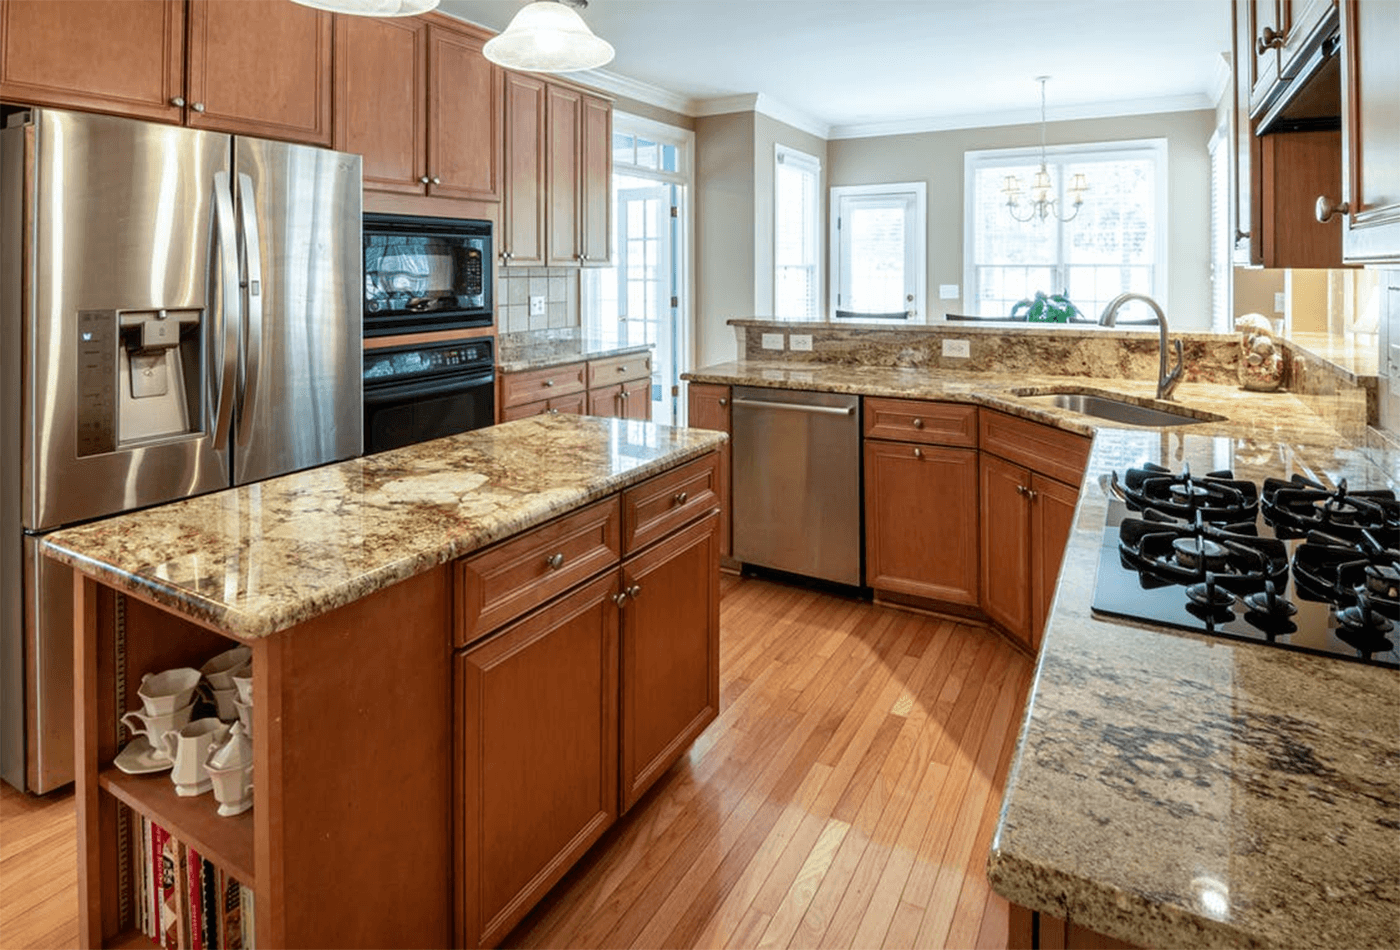 Is Granite Counter Hard To Maintain?